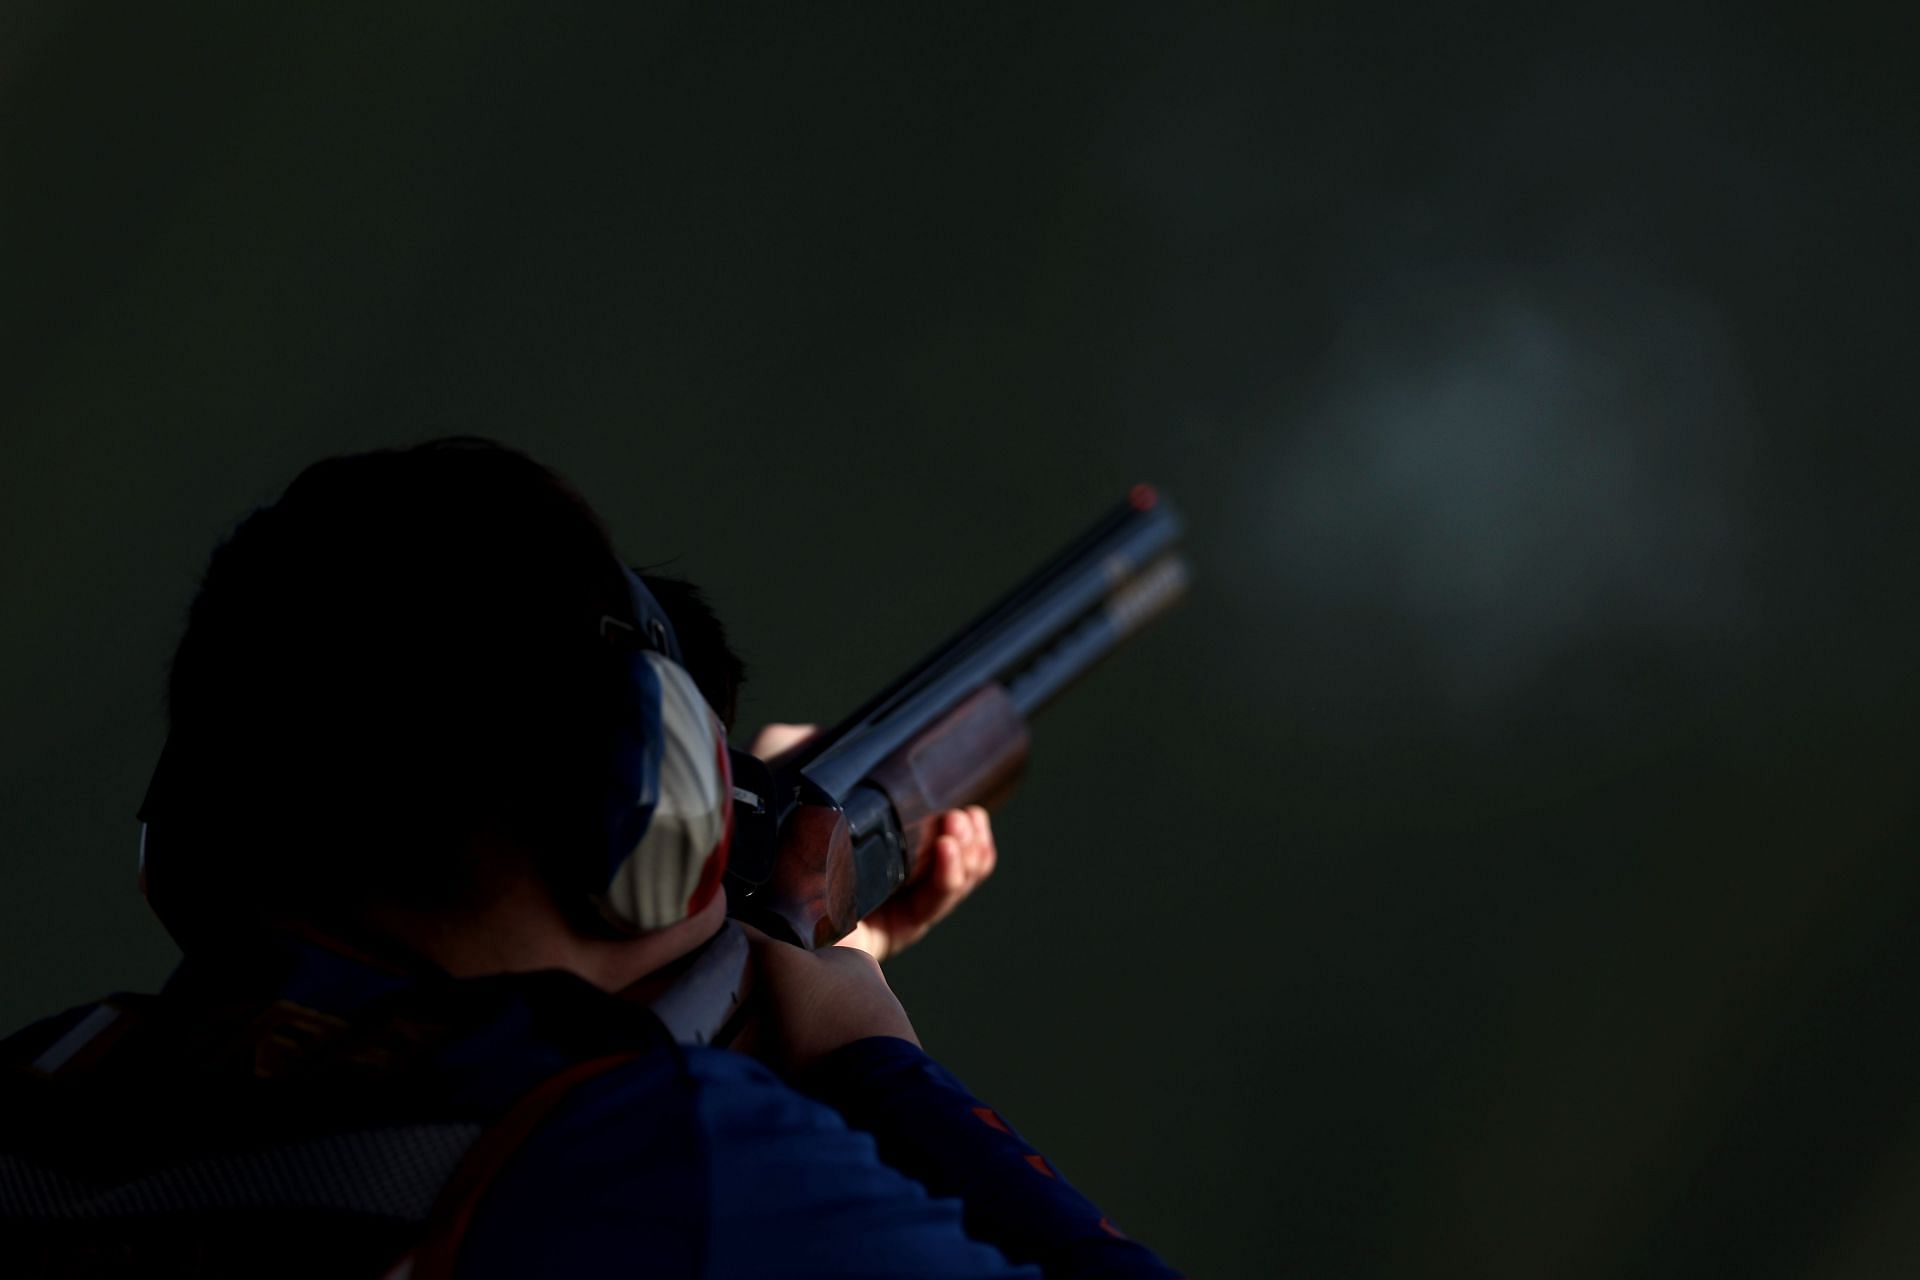 Chateauroux National Tournament - 10/25/50 And Shotgun, Olympic Shooting Test Event